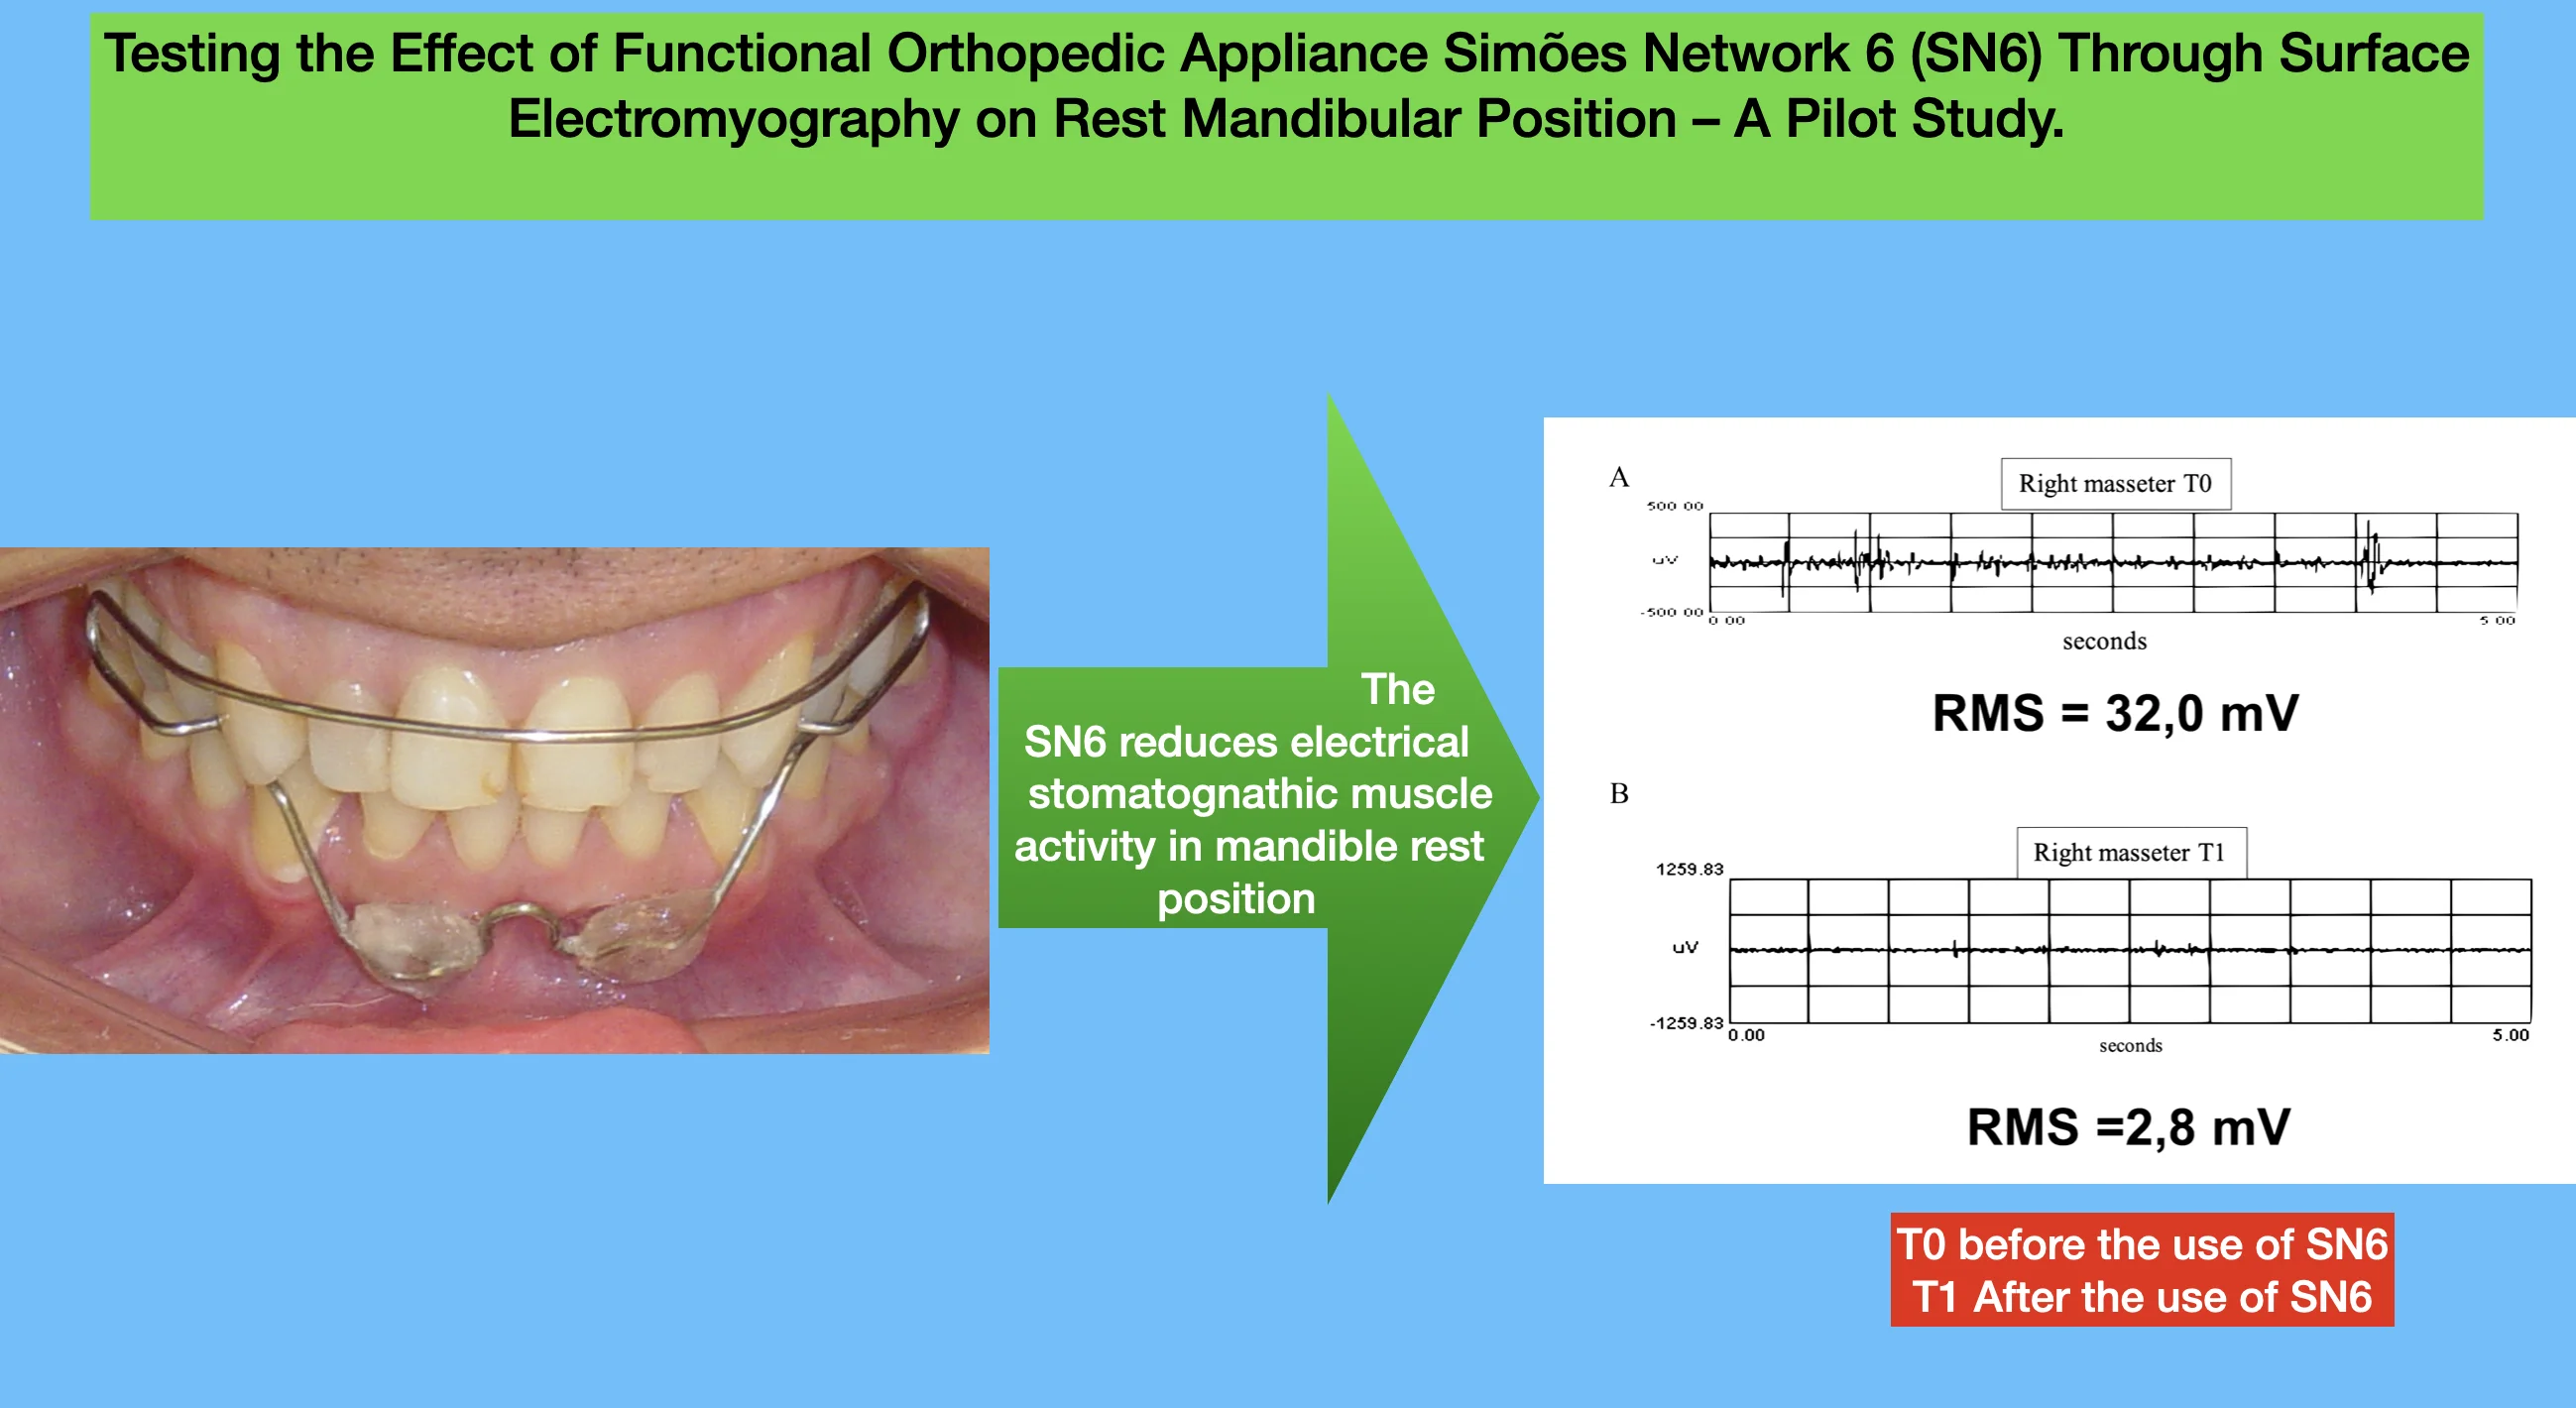 Testing the effect of functional orthopedic appliance Simões network 6 (SN6) through surface electromyography on rest mandibular position – a pilot study